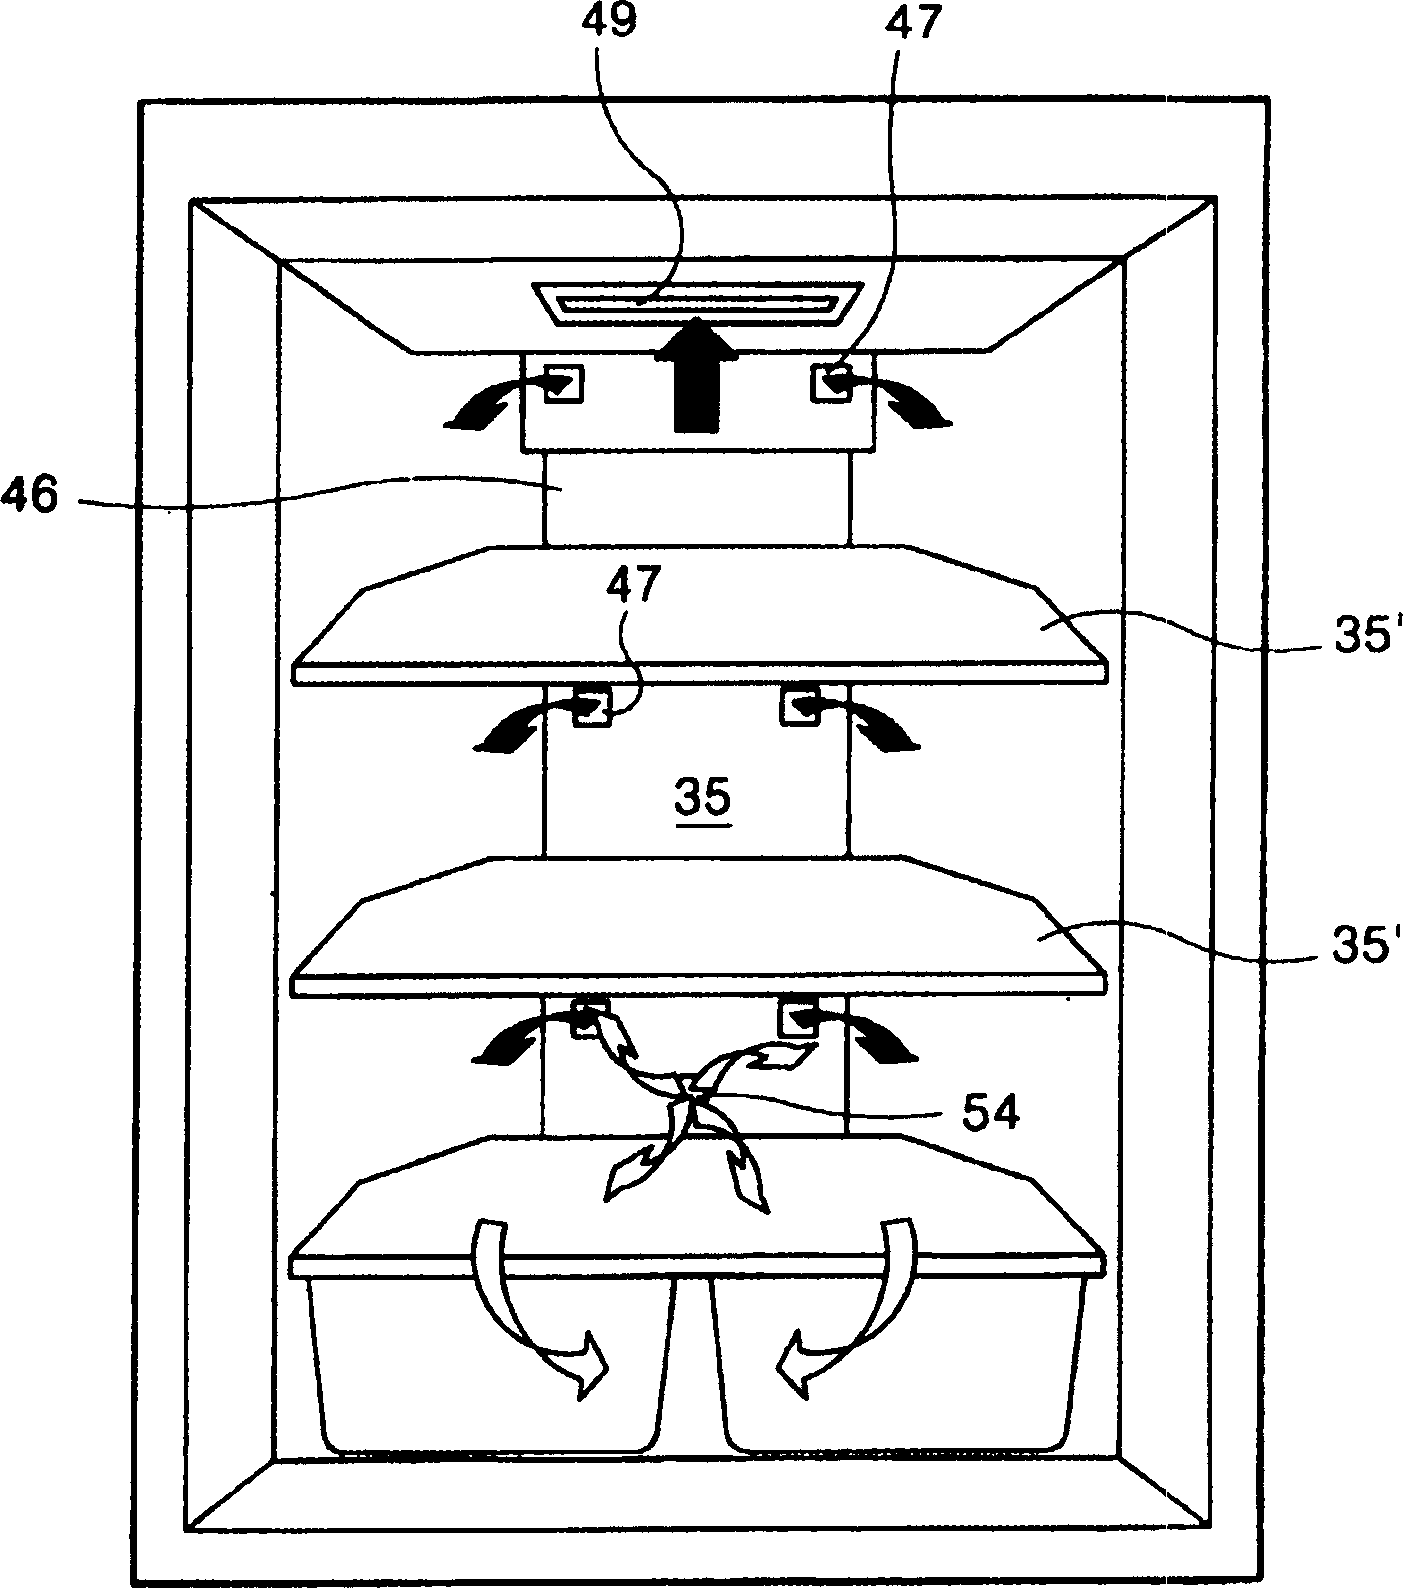 Apparatus and method for controlling cold air circulation in refrigerator